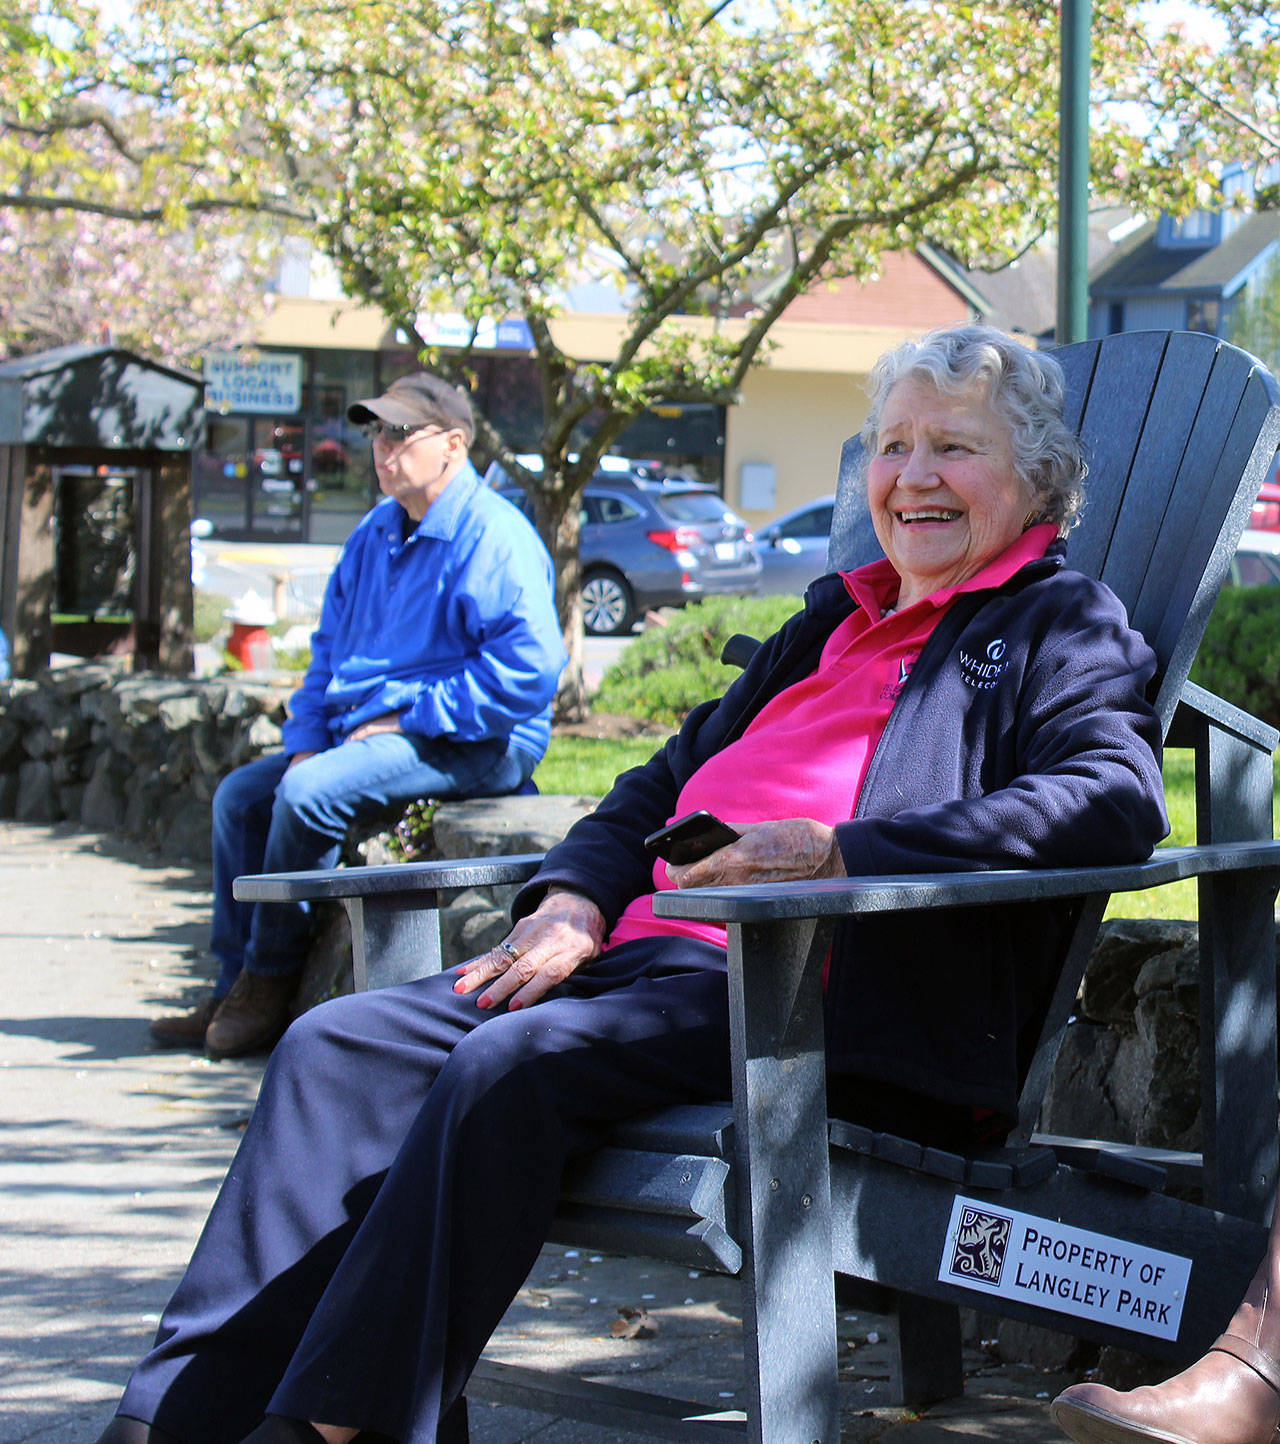 Marion Henny couldn’t stop smiling Tuesday as she watched her company’s original telephone center return to downtown Langley. (Photo by Patricia Guthrie/Whidbey News Group)